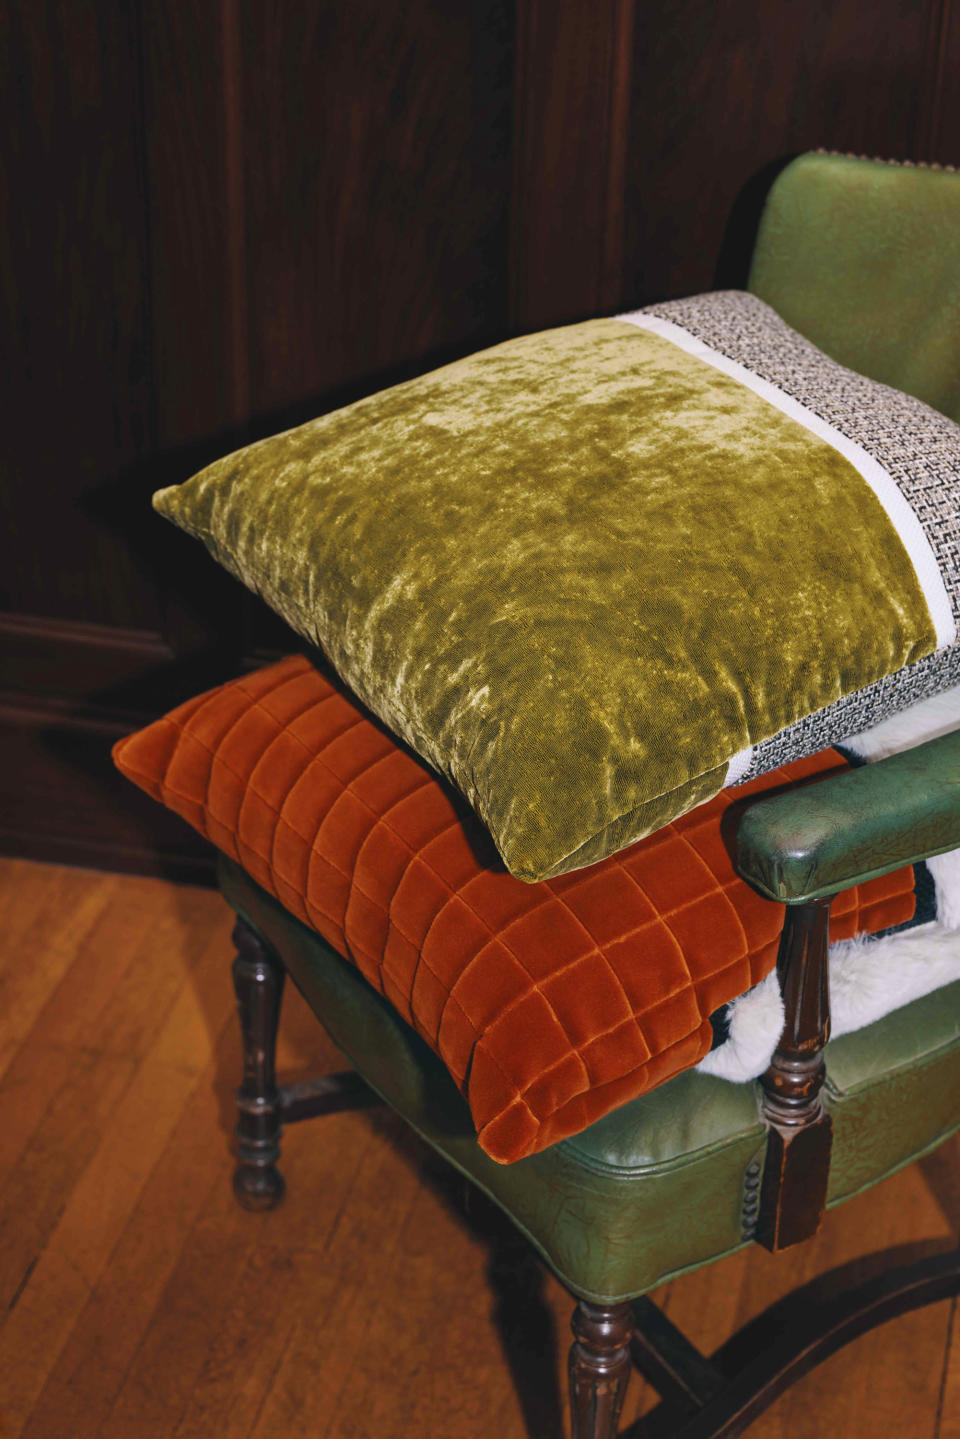 This image provided by Marrimor Objects shows Marrimor pillows. The collection features toss pillows that combine two different but equally soft materials like boucle, wool, velvet and faux fur. (Carl Ostberg/Marrimor Objects via AP)